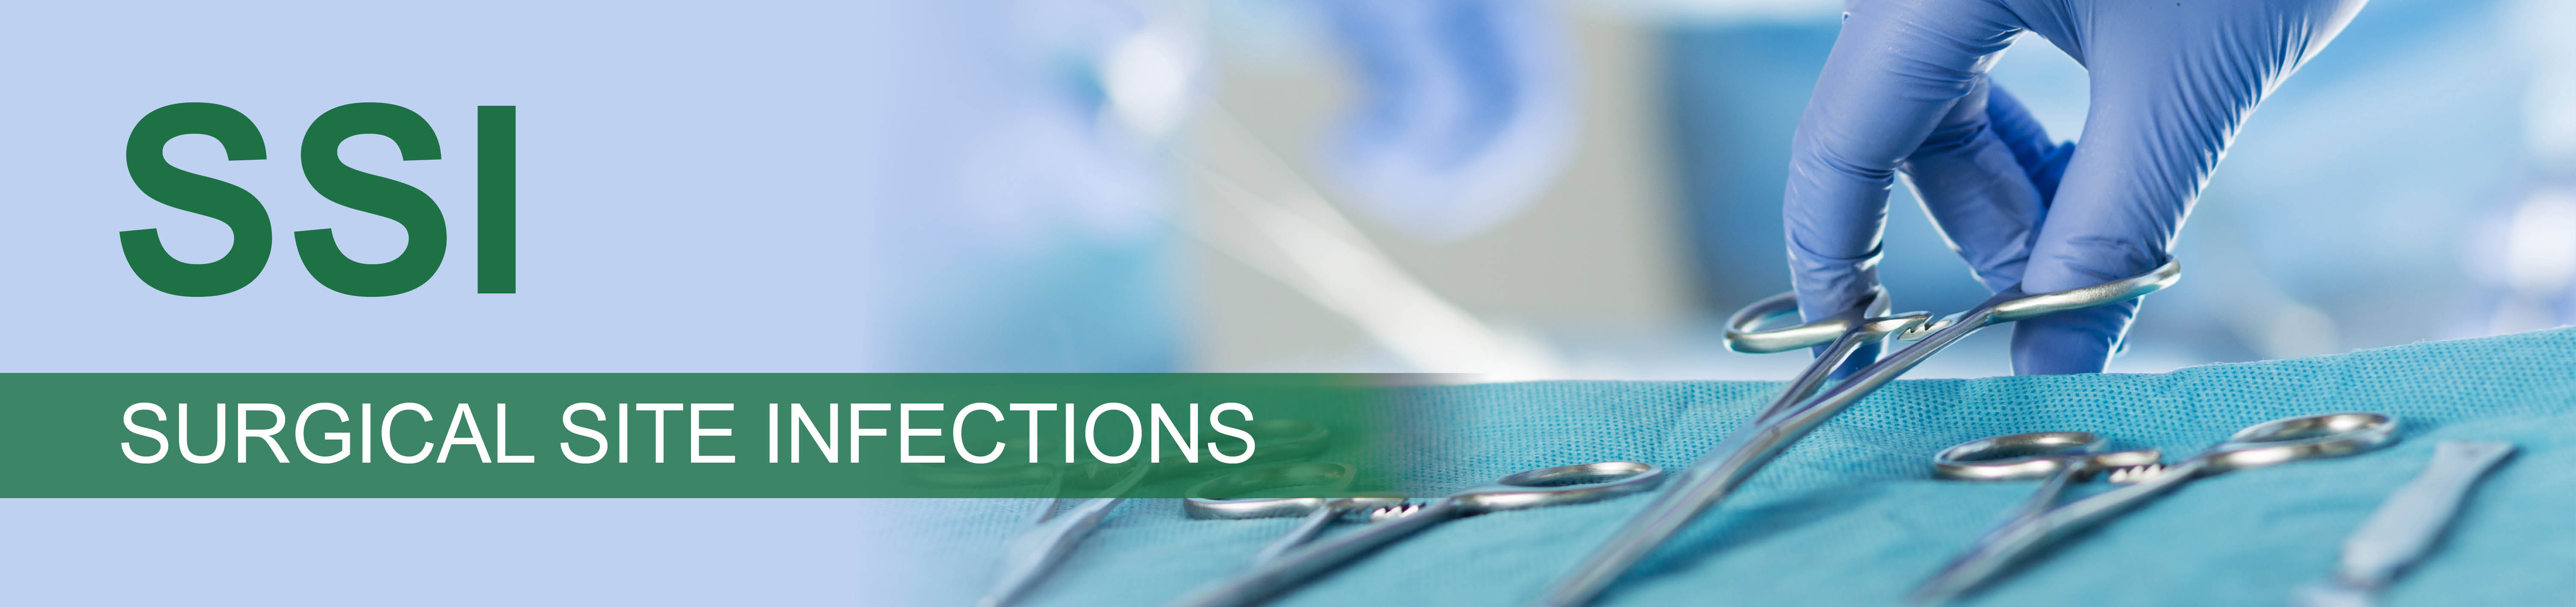 SSI: Surgical Site Infections